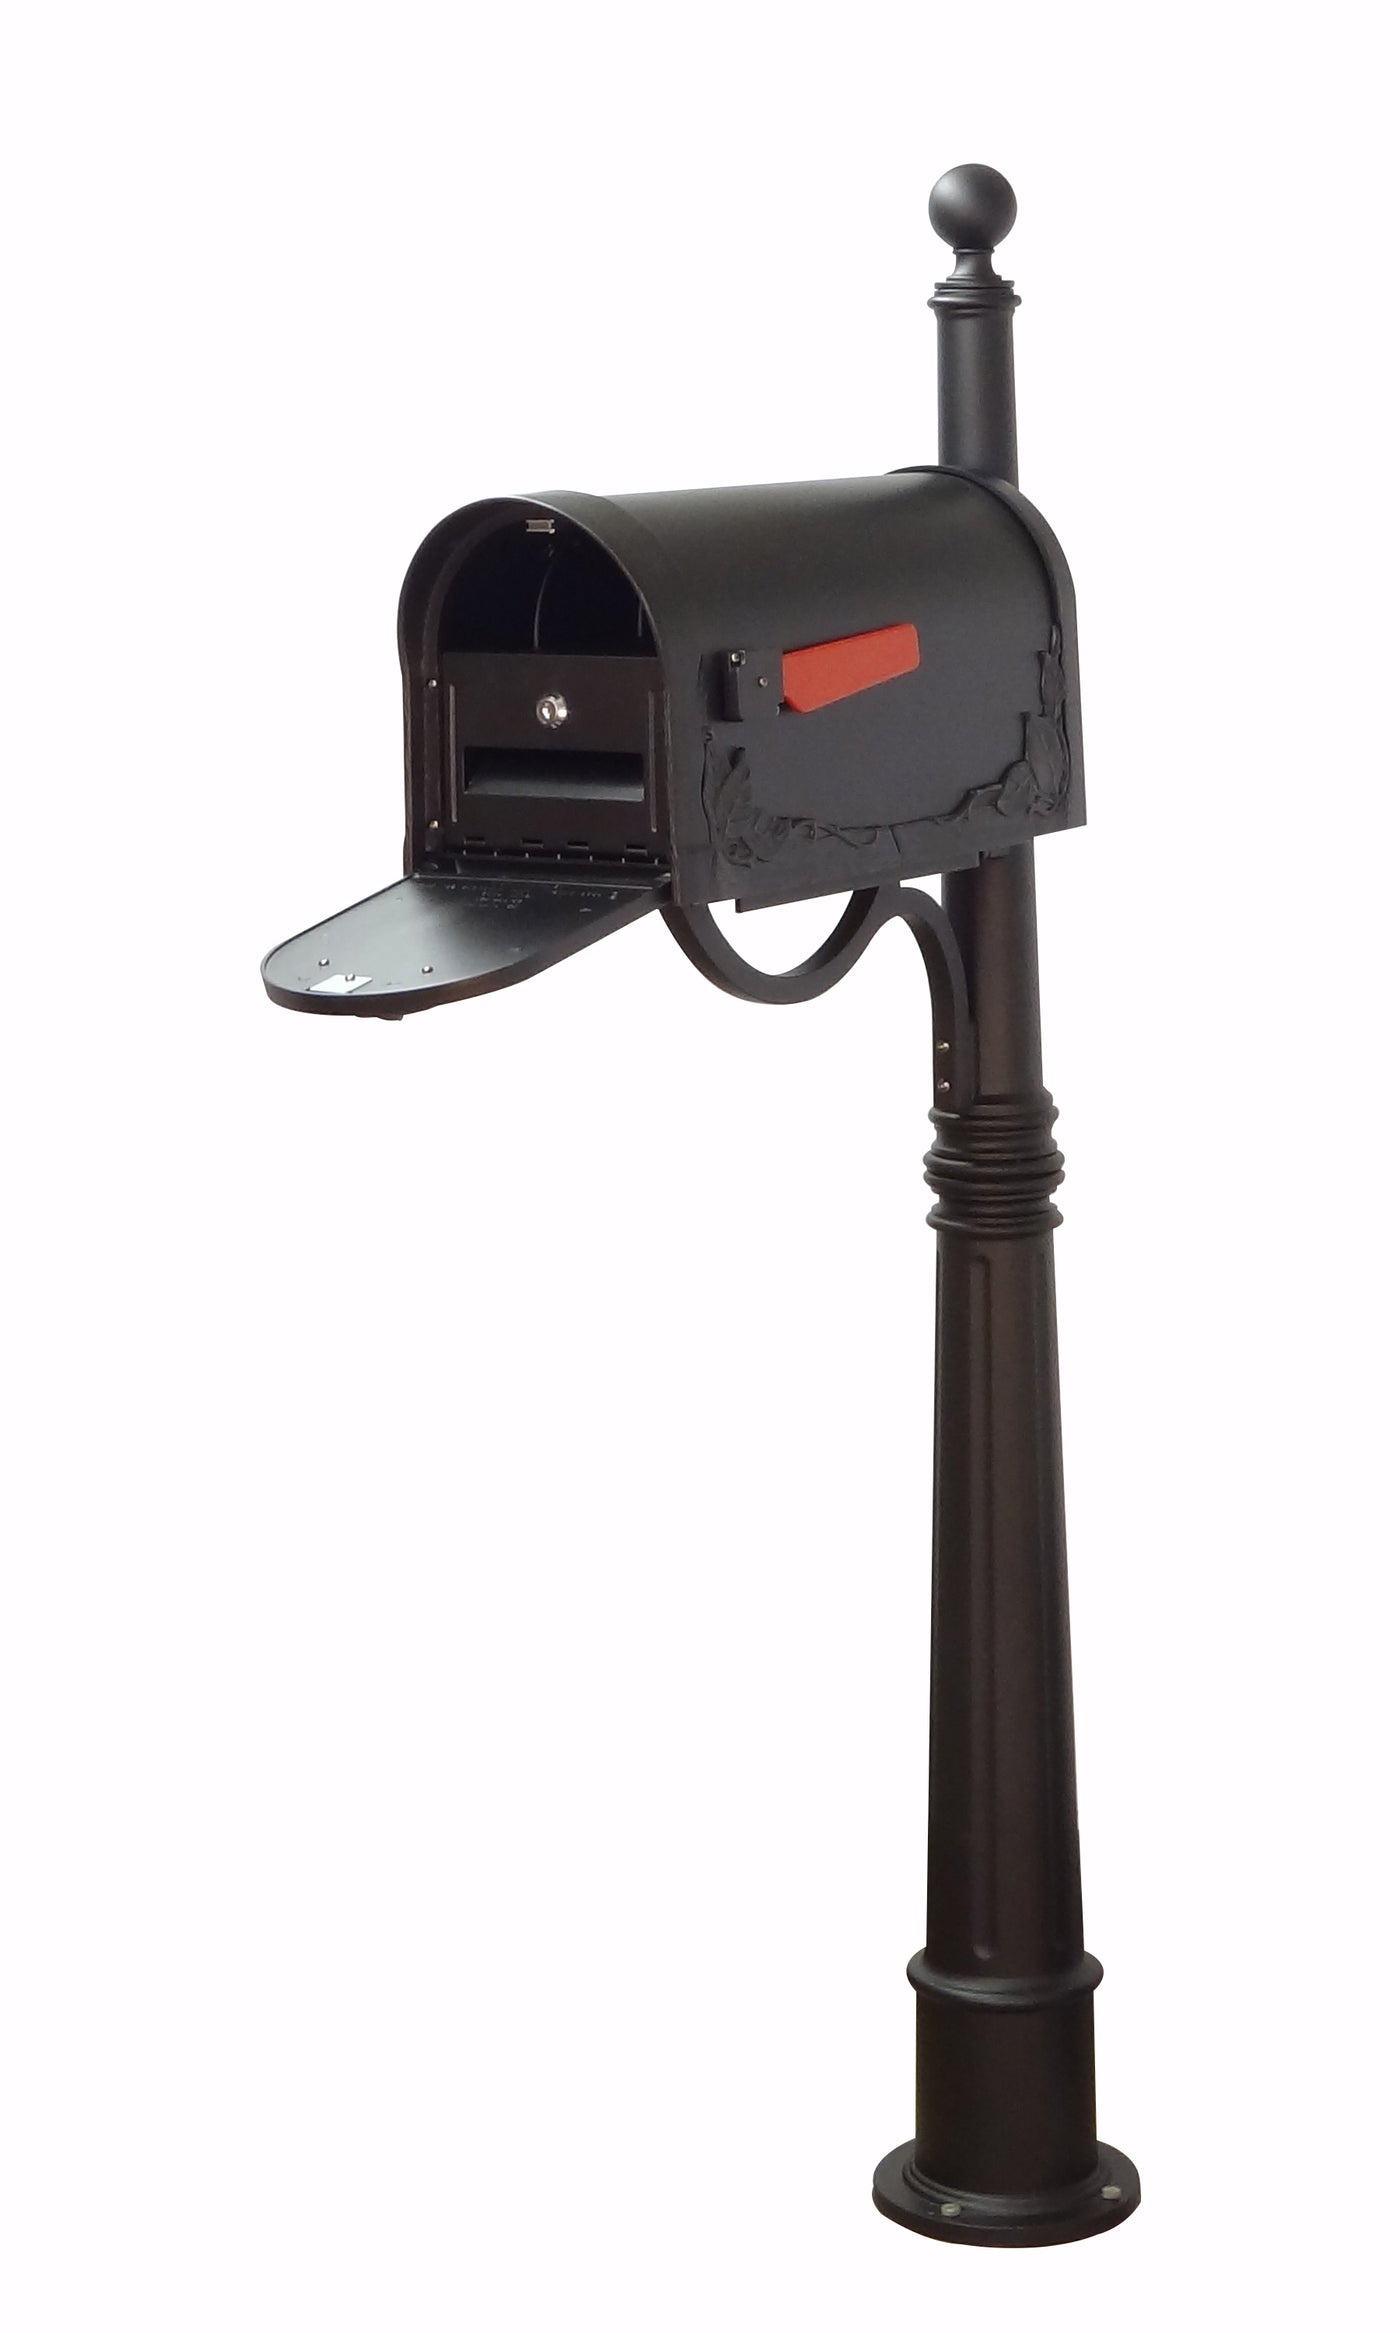 Floral Curbside Mailbox with Locking Insert and Ashland Mailbox Post